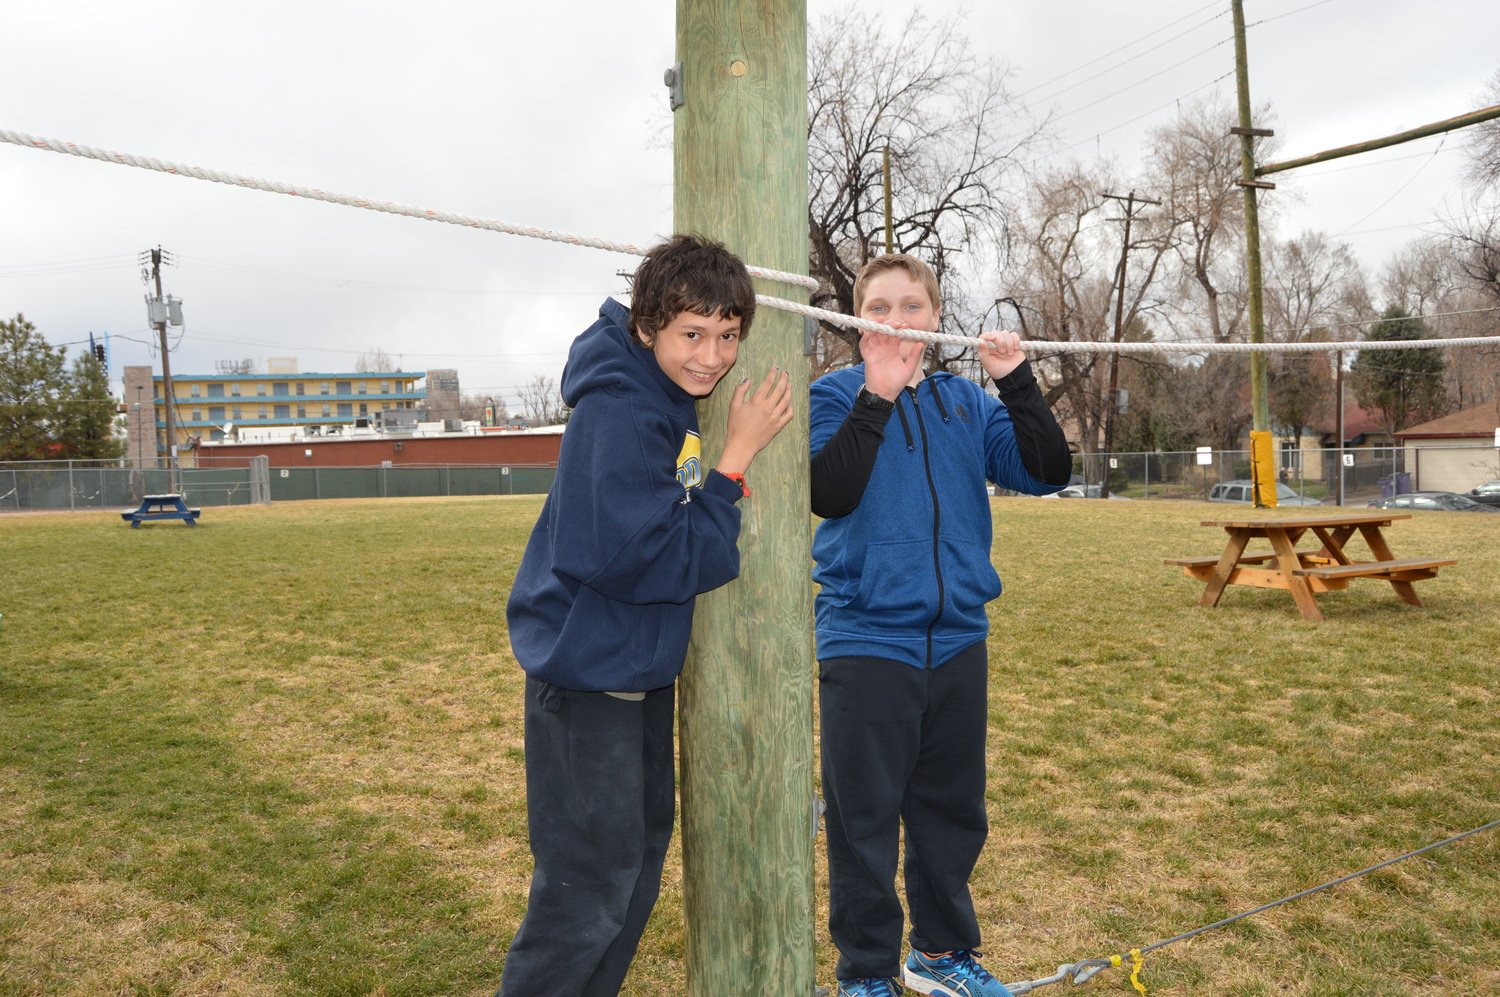 Trained facilitators help kids tackle the ropes course where they learn teamwork and communication skills.